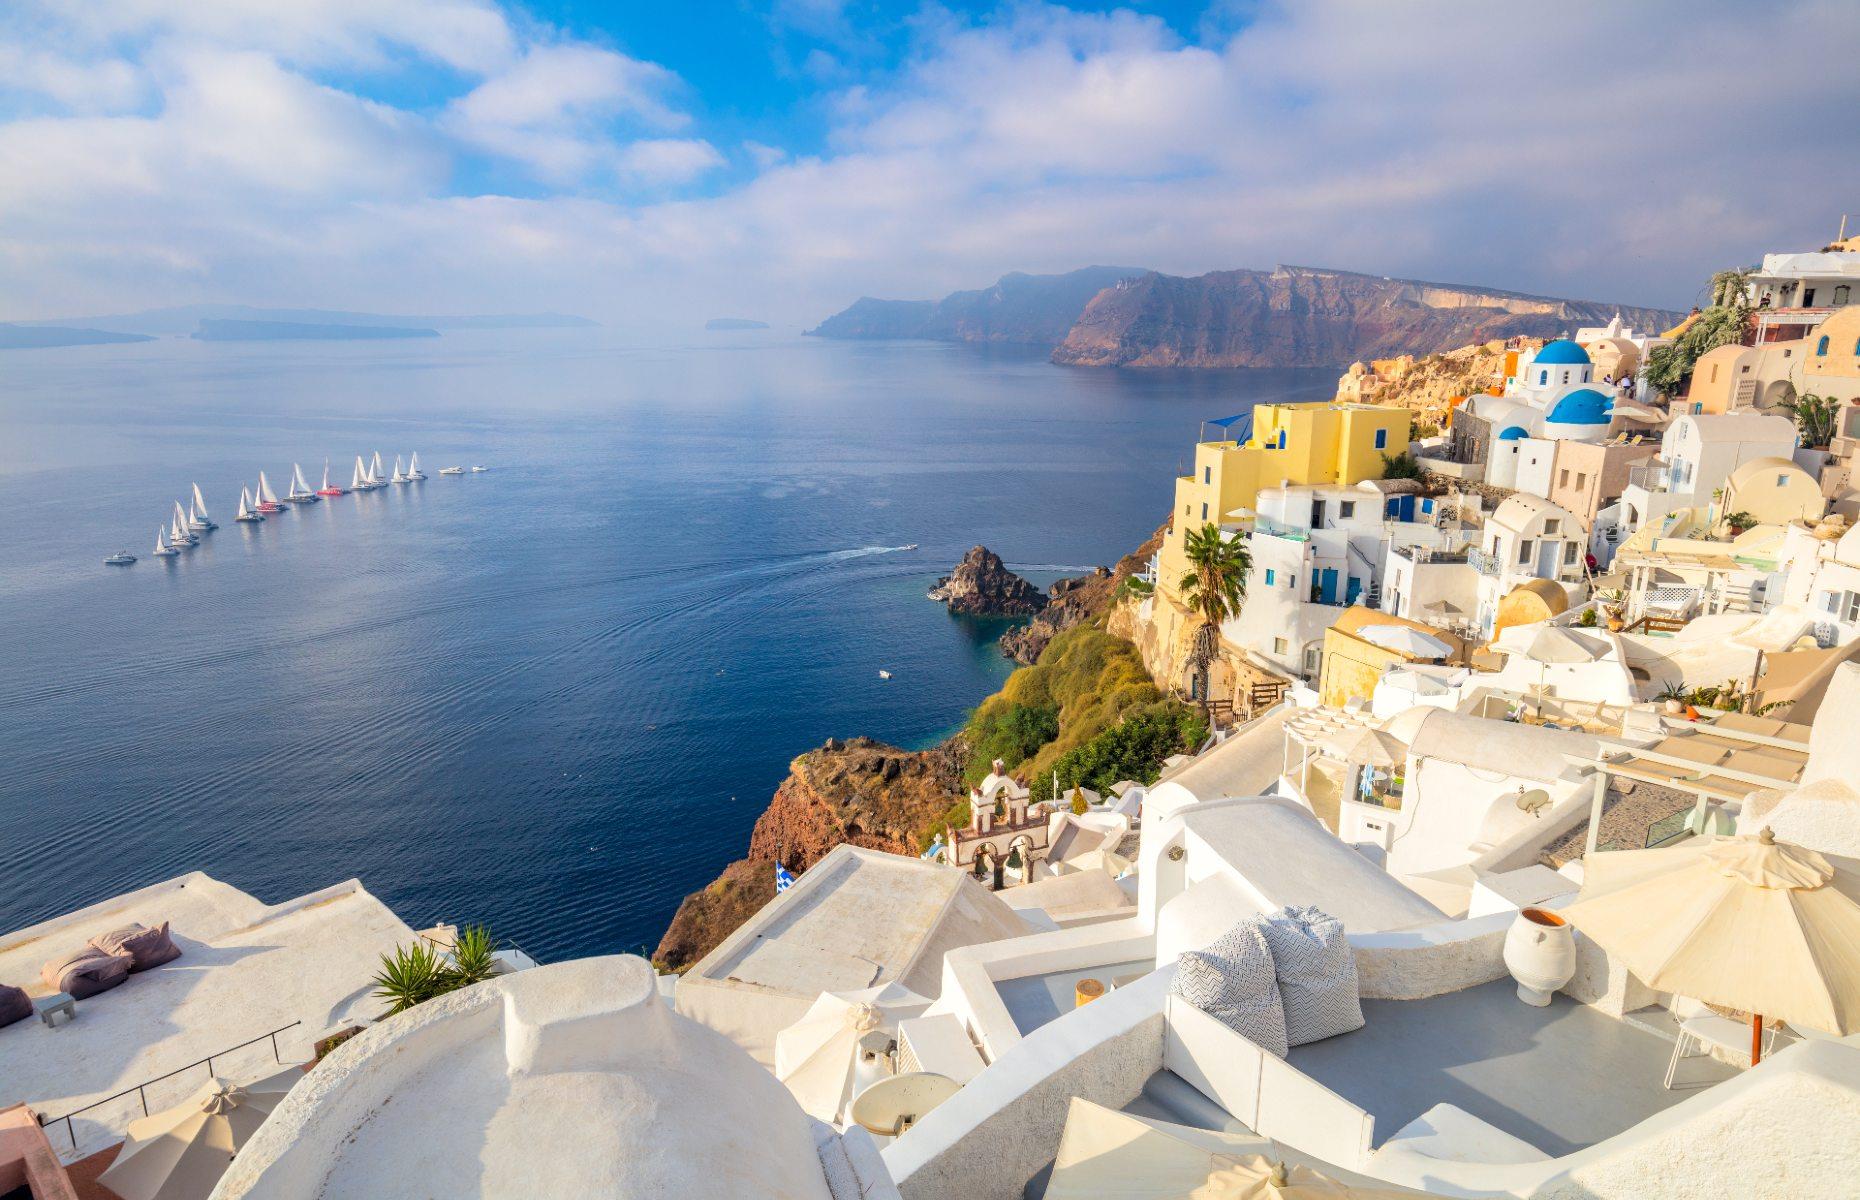 <p>Another destination cracking down on cruise ships is the picture-perfect island of Santorini. The Greek isle, famed for its blue-and-white buildings set on dramatic coastlines, received an enormous two million tourists in 2018, with claims there were as many as 18,000 visitors from cruise ships alone on the busiest days. To combat this, officials capped cruise passenger arrivals at 8,000 per day from 2019. </p>  <p><a href="https://www.loveexploring.com/news/144966/lesser-known-greek-islands-to-visit-crowd-free-travel-greece"><strong>Lesser-known Greek islands to visit before the crowds catch on</strong></a></p>